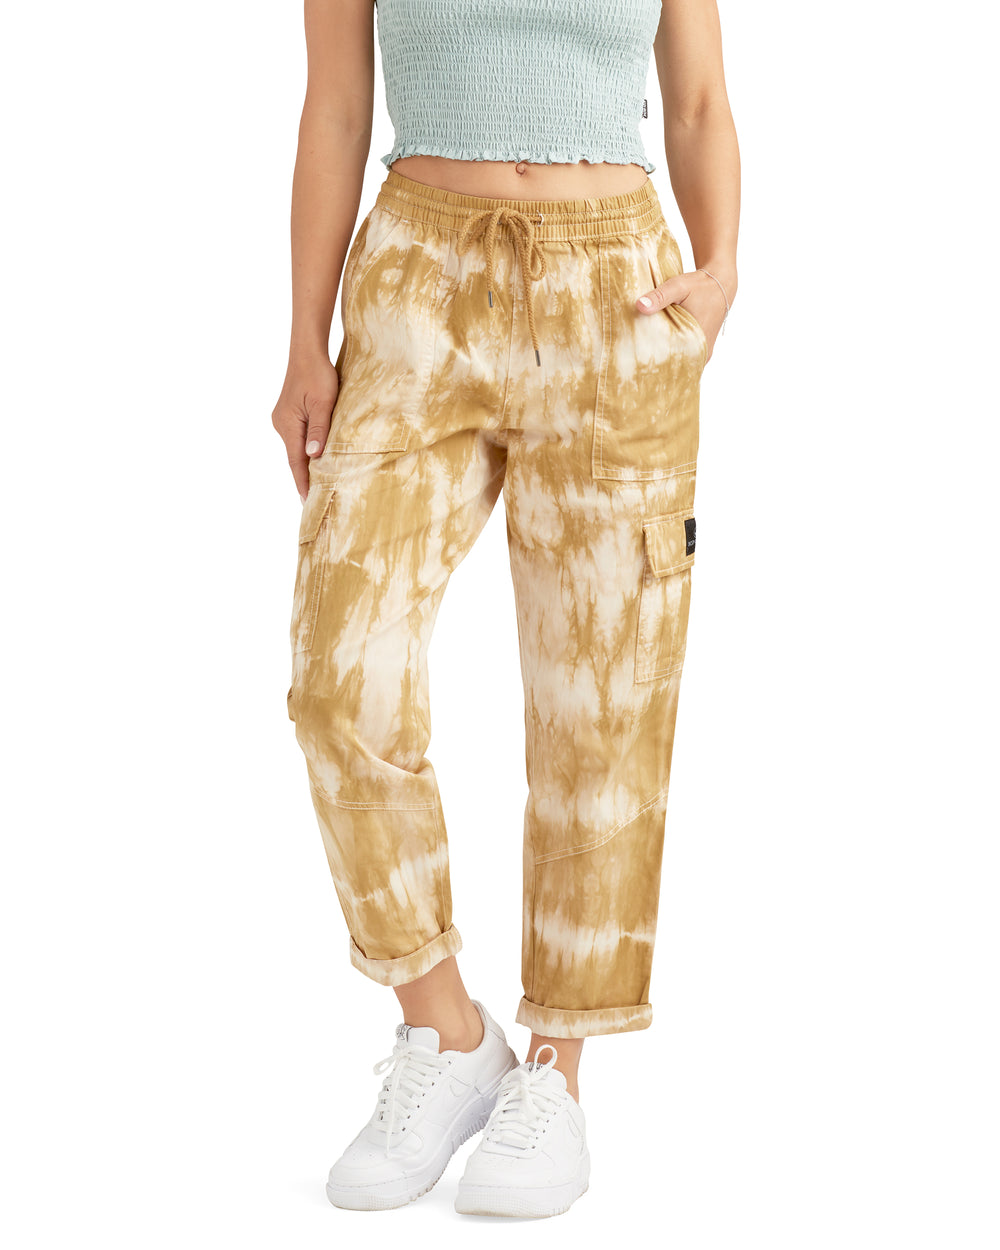 Body Glove Womens Camelia Mid-Rise Cargo Pants - Tie/Dye in Sand/White, Size XS, Cotton